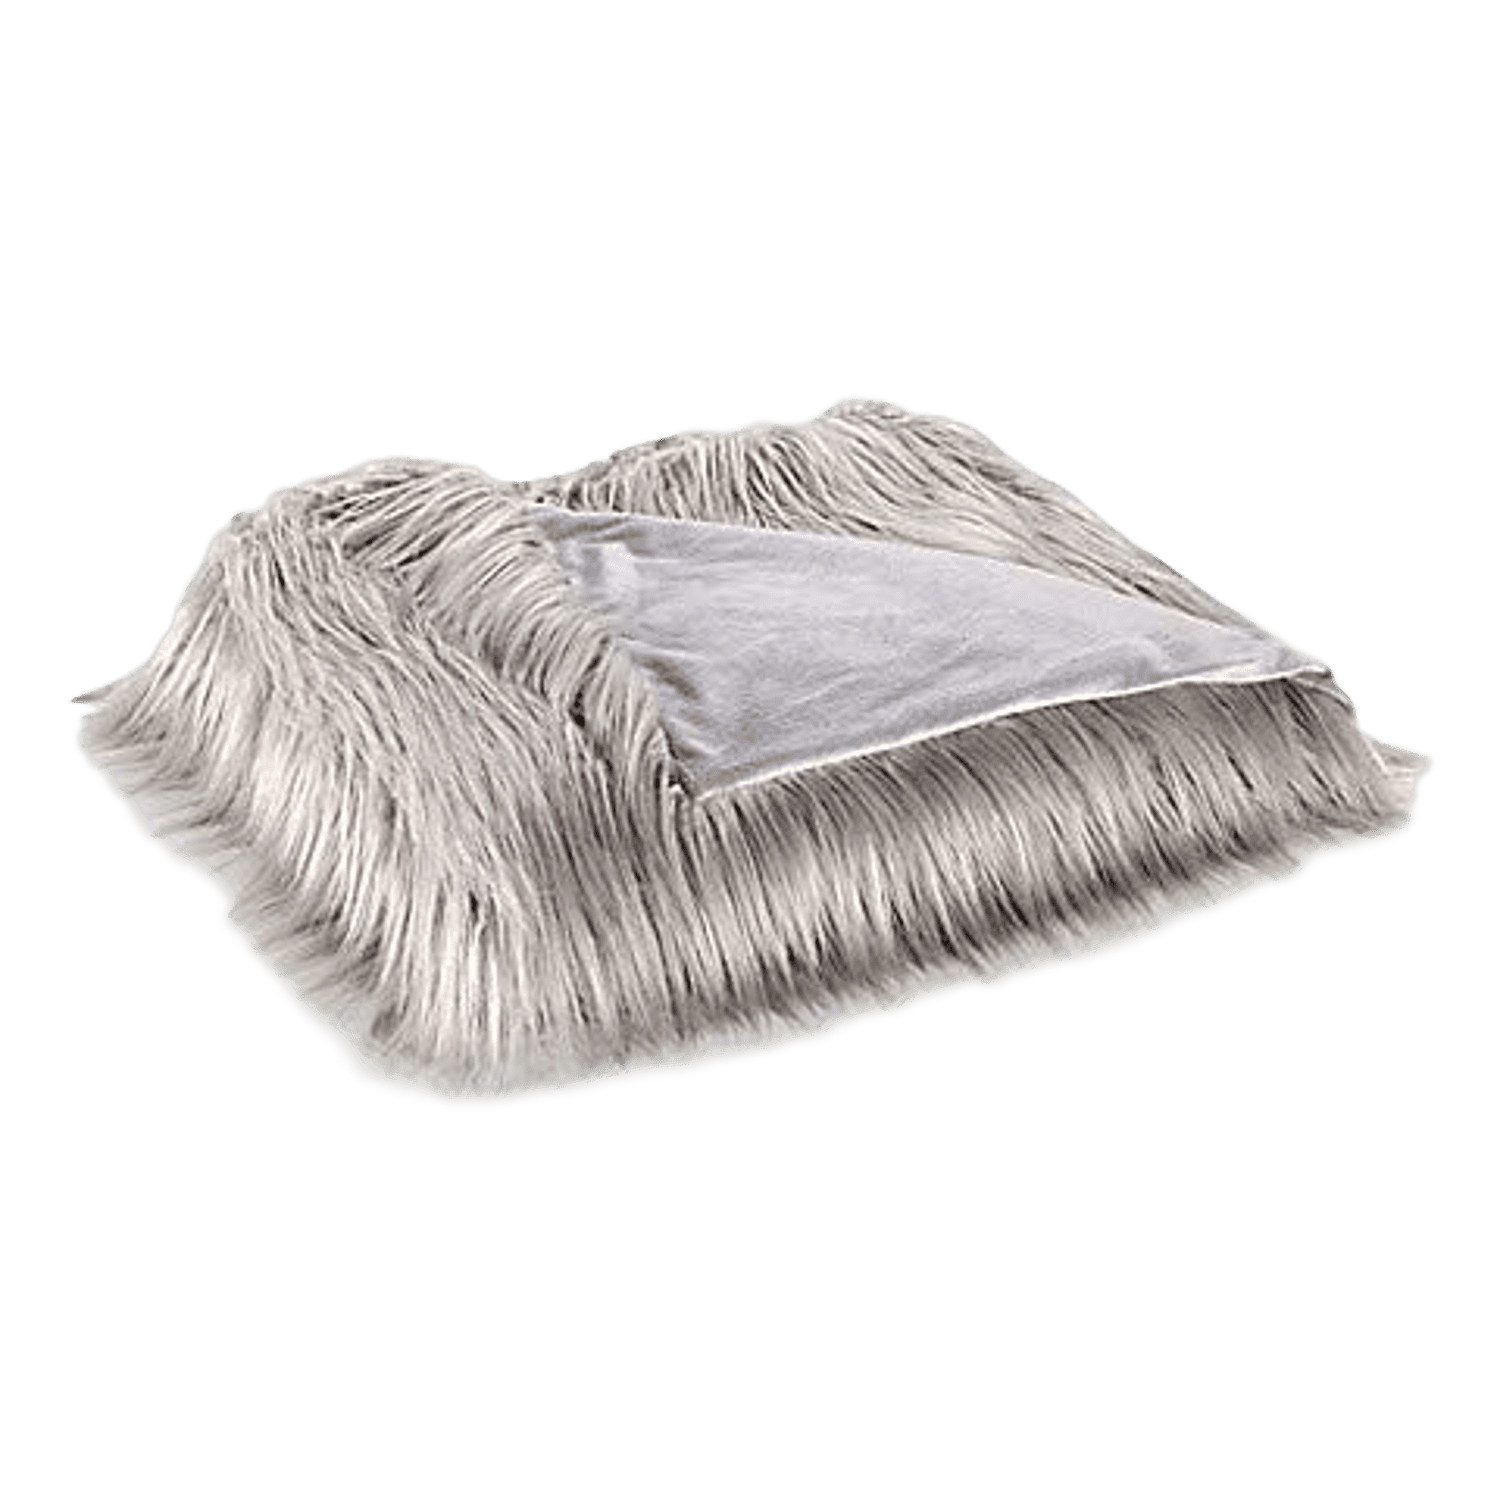 Flokati Faux Fur Throw Blanket In Silver 60 W X 50 L 100 Acrylic Mongolian Fur Construction Makes A Cozy Addition To Your Bed Or Sitting Room Sofa Walmart Com Walmart Com